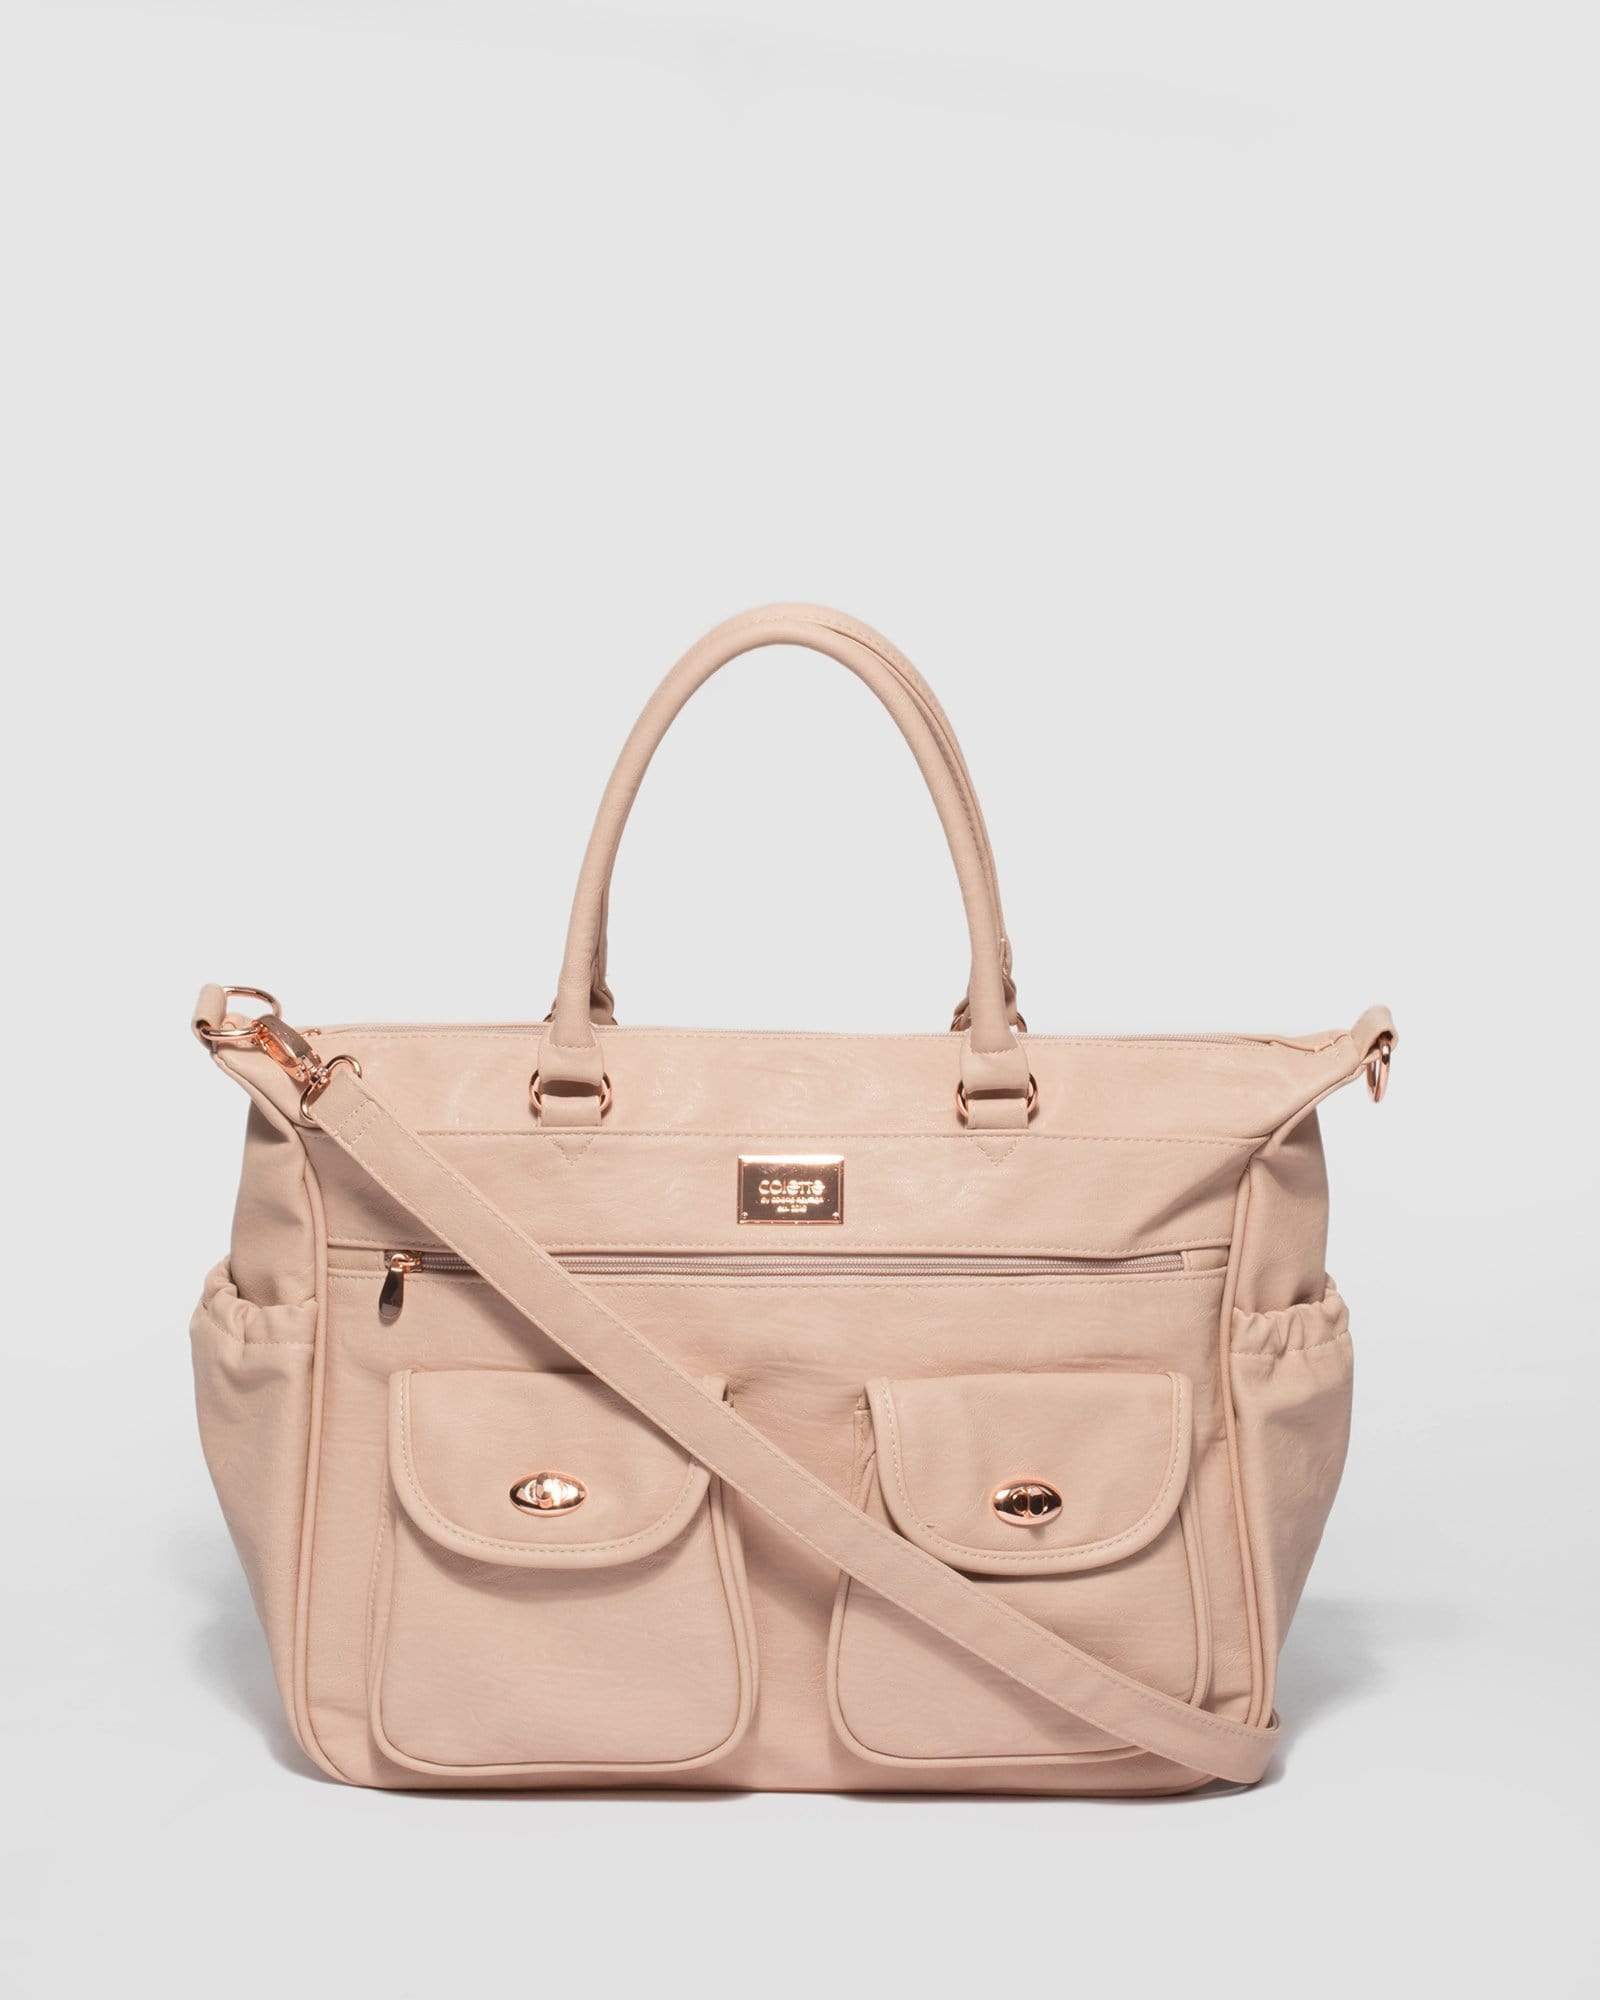 Image of Pink Baby Travel Bag with rose gold hardware